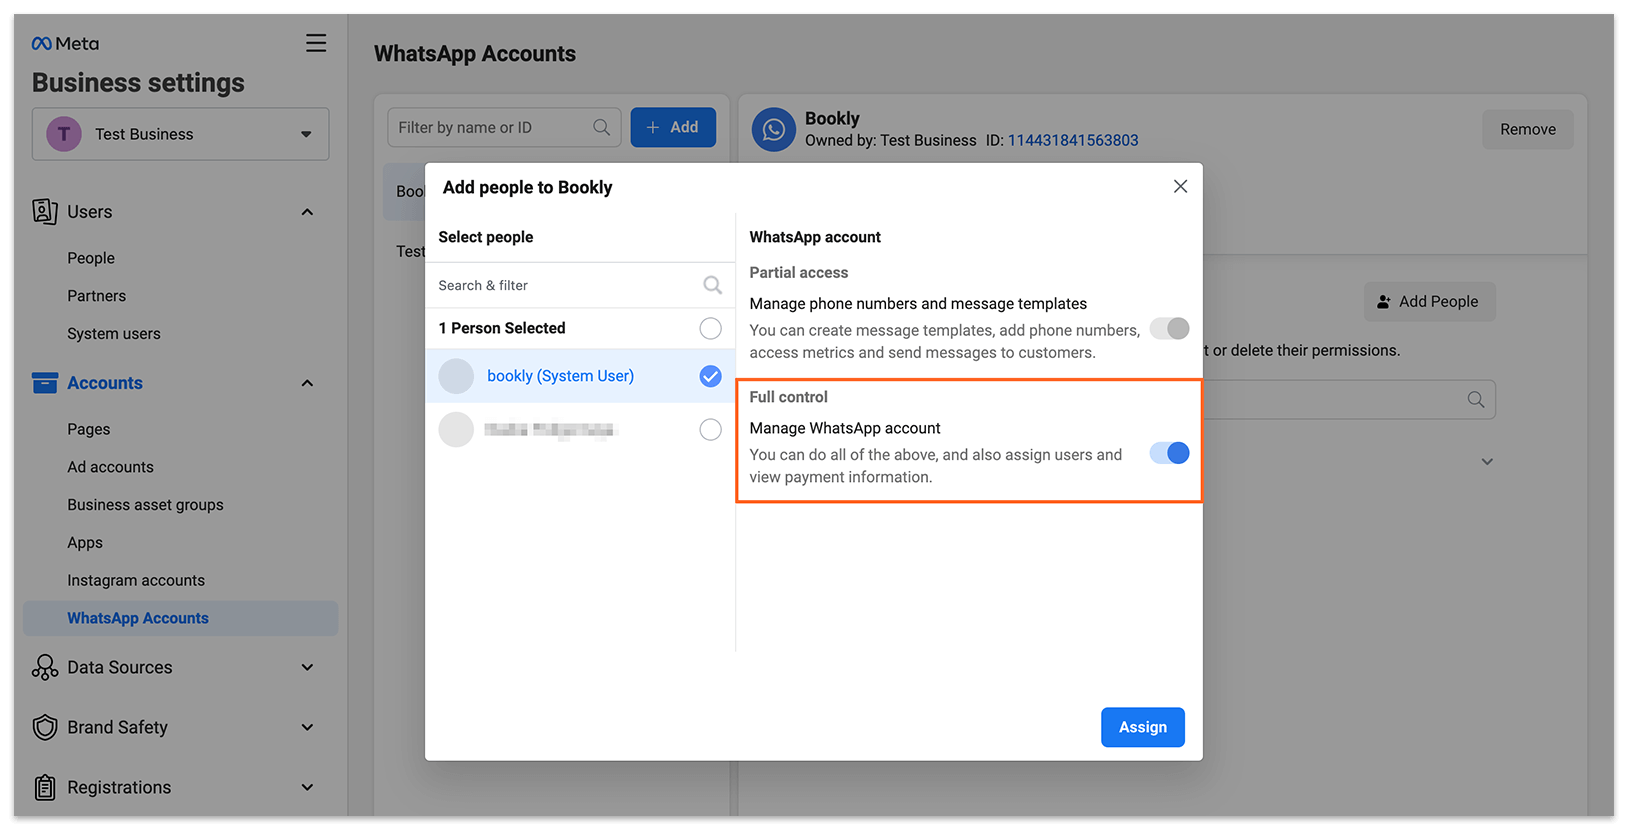 Create Permanent access token in the app settings